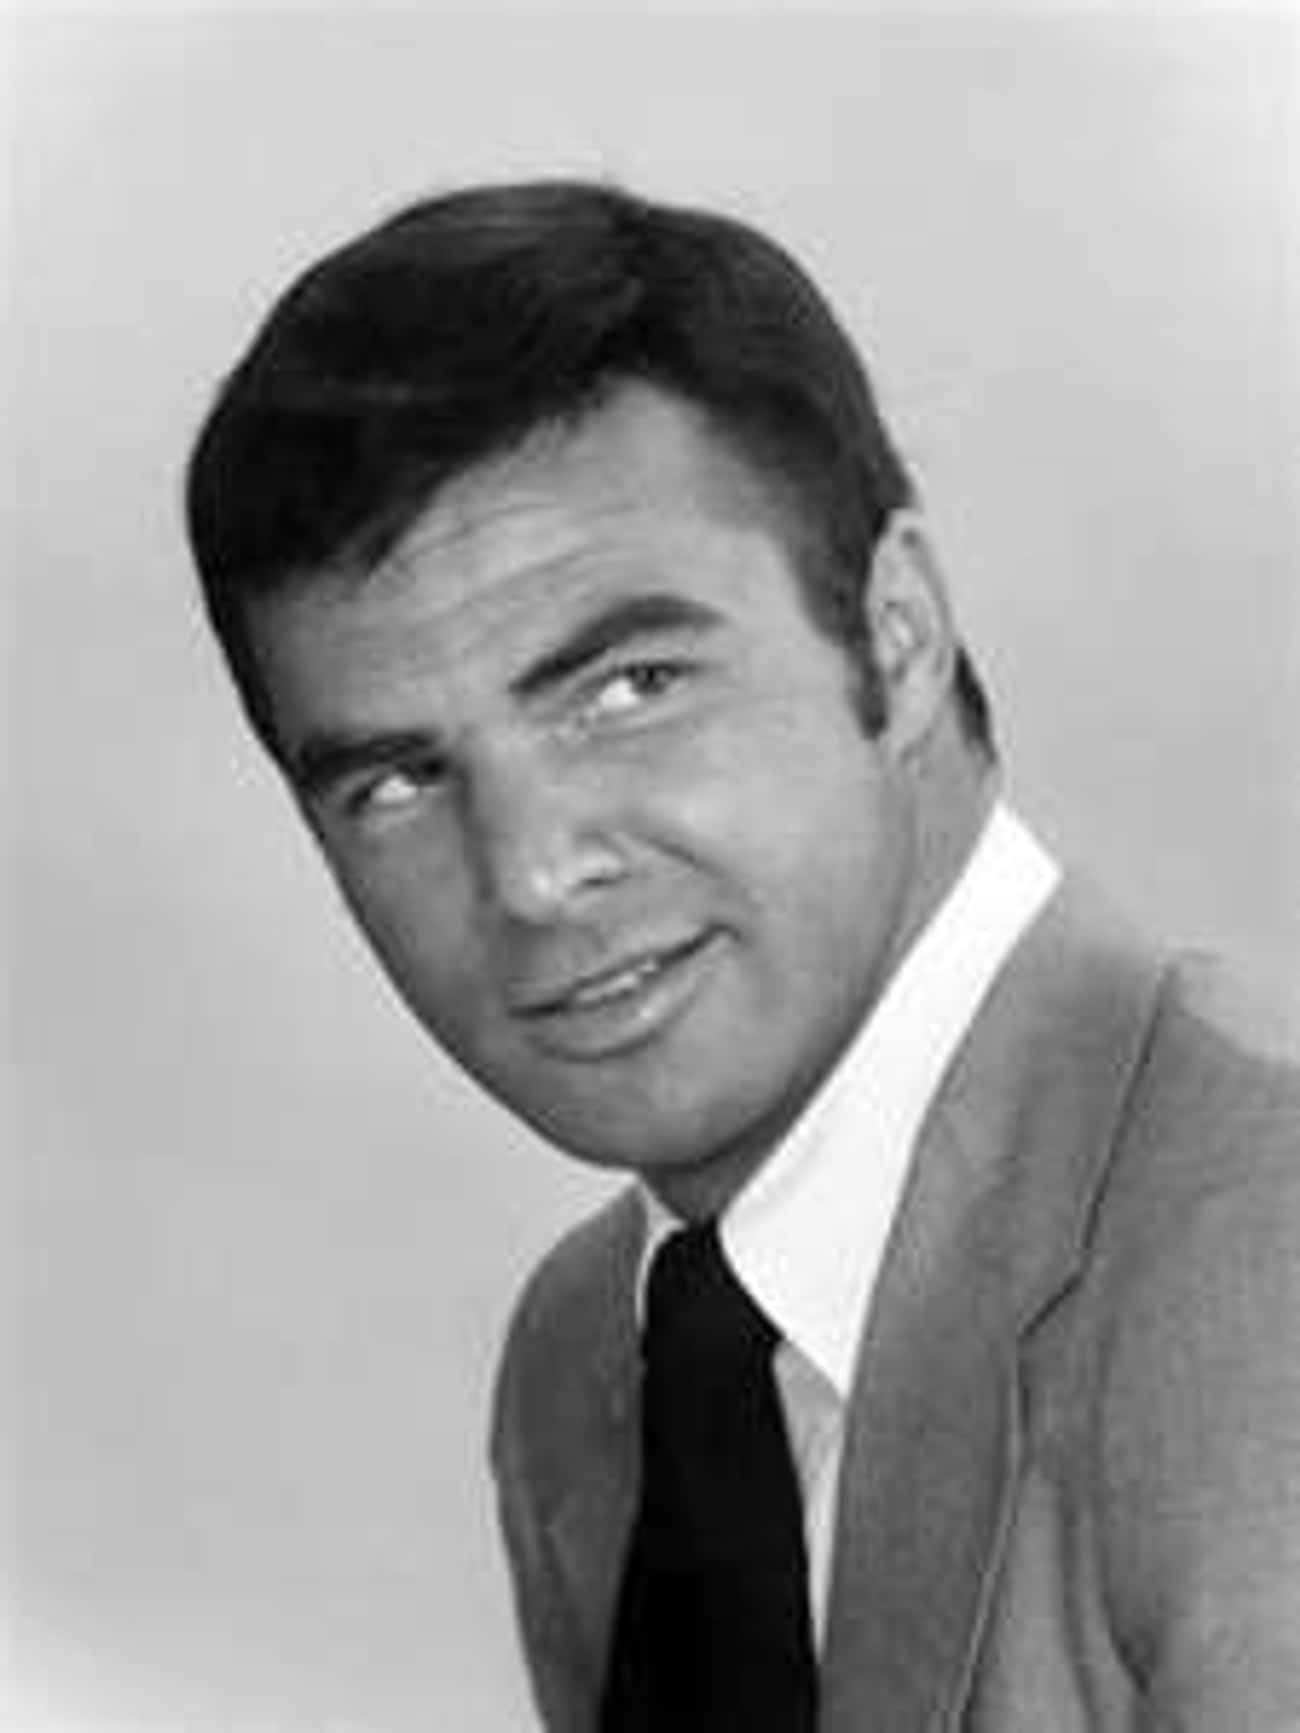 Young Burt Reynolds in a Gray Suit and Black Tie